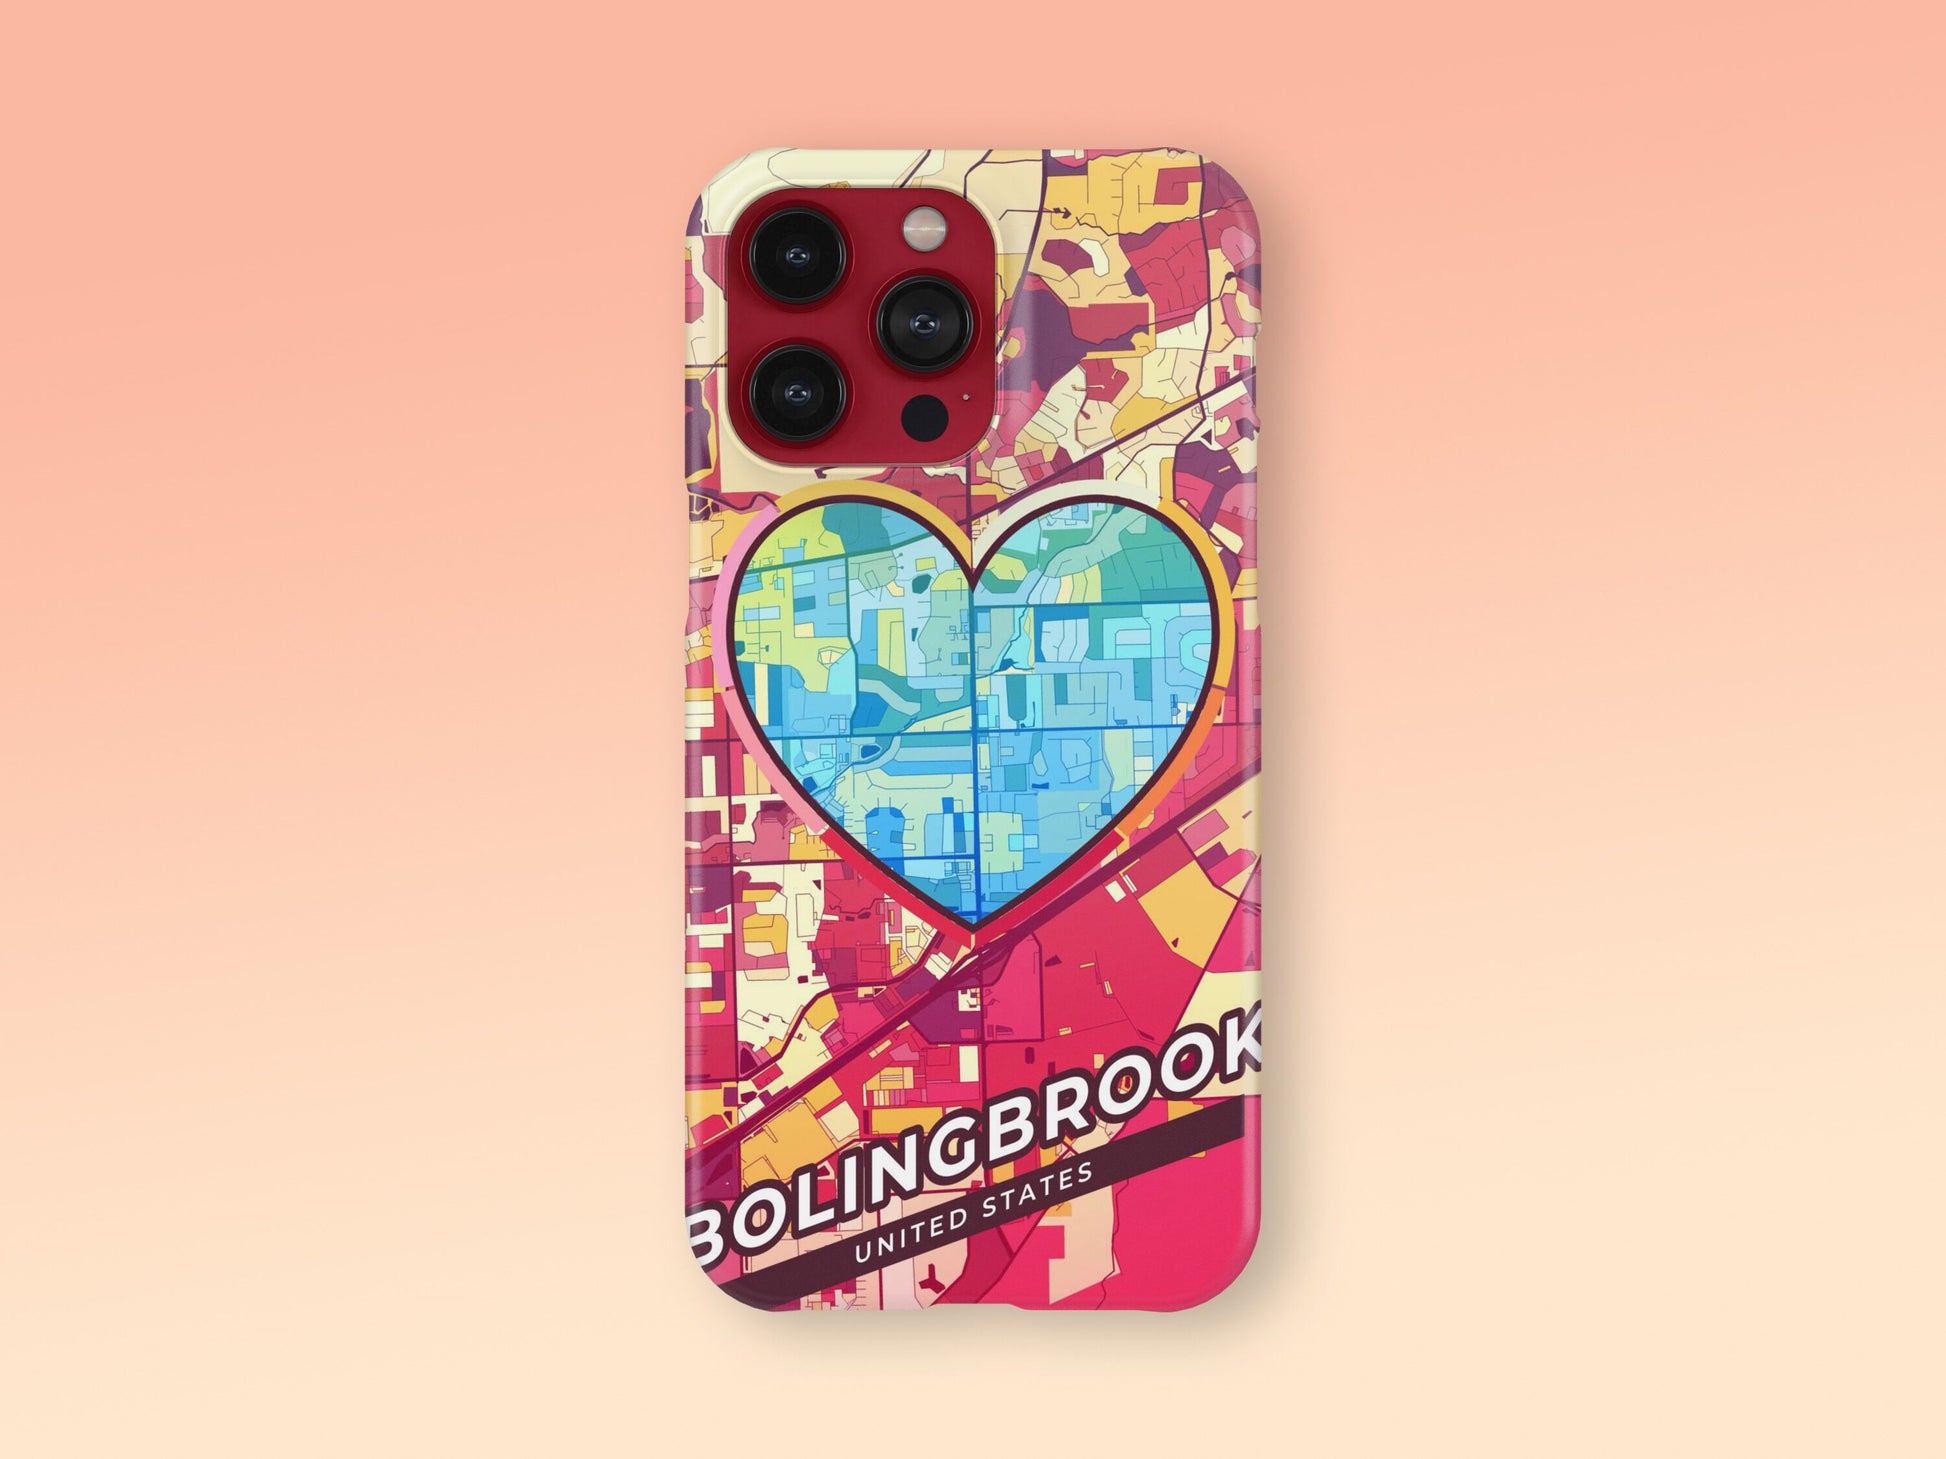 Bolingbrook Illinois slim phone case with colorful icon. Birthday, wedding or housewarming gift. Couple match cases. 2